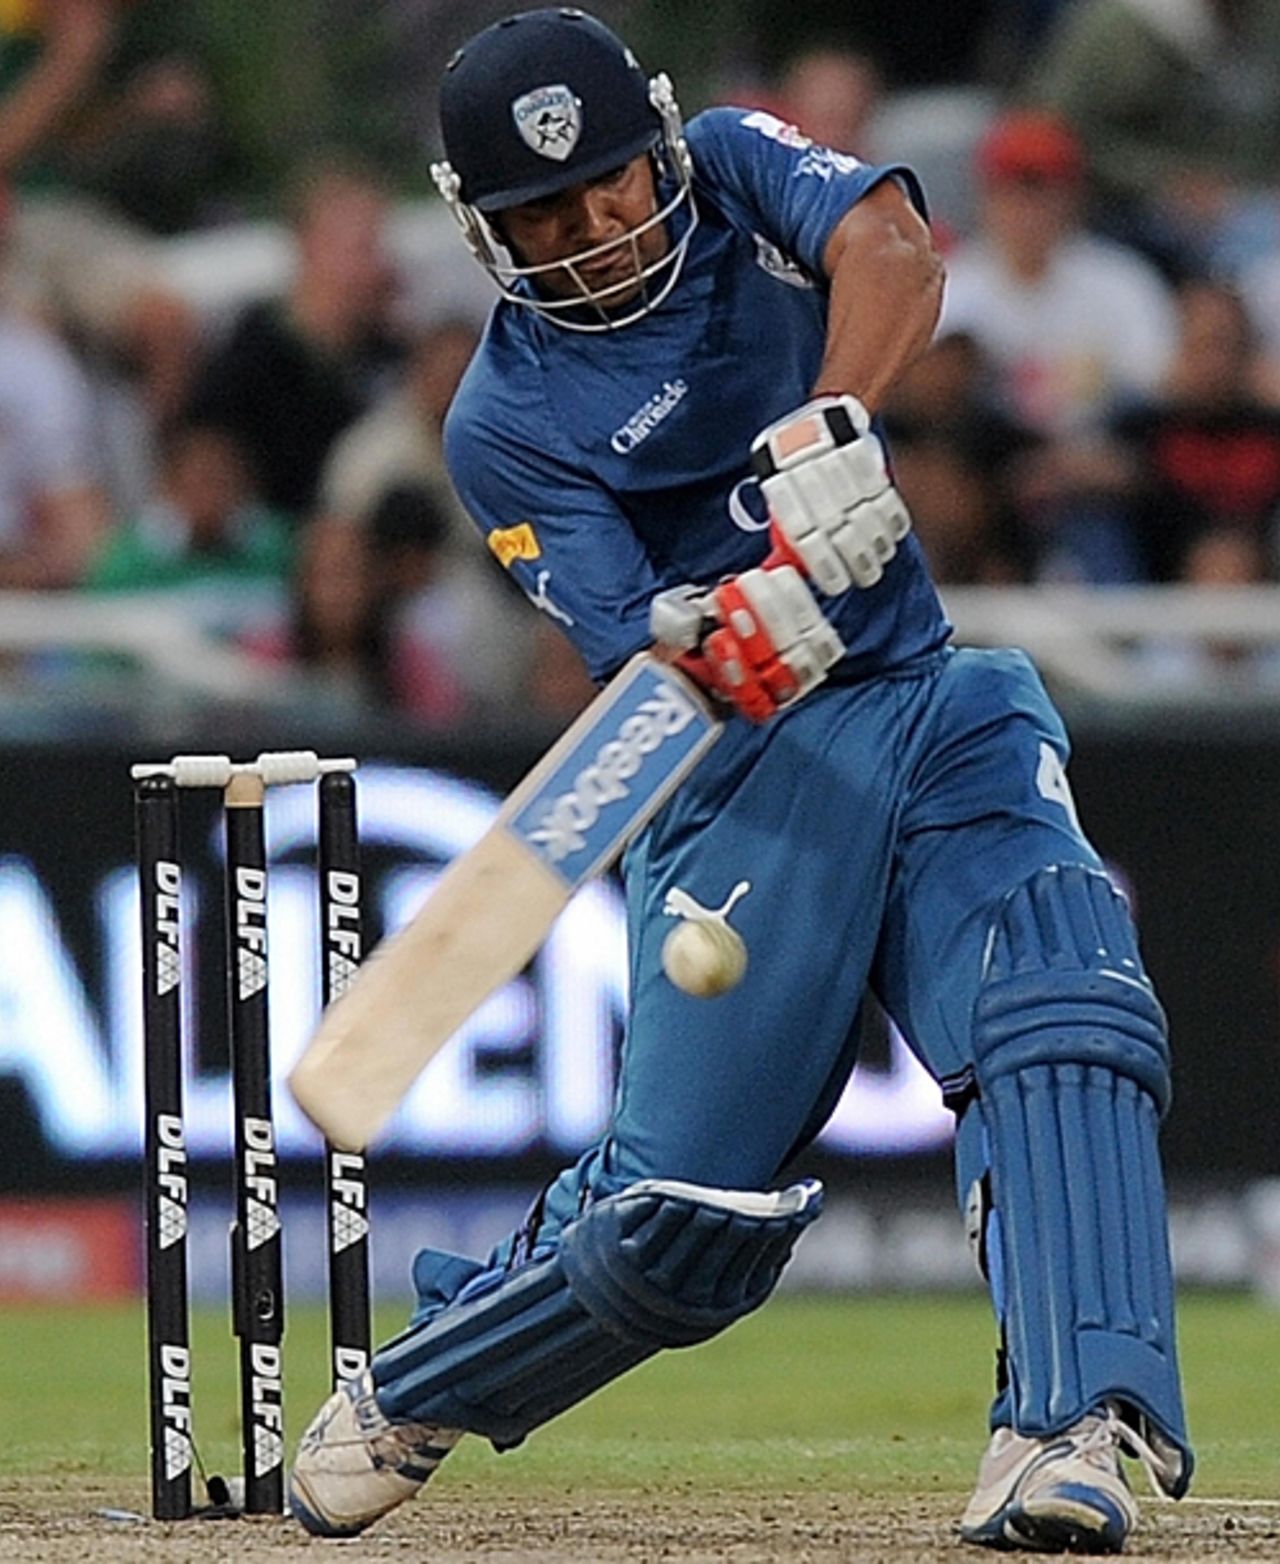 Rohit Sharma shifts gears, Bangalore Royal Challengers v Deccan Chargers, IPL, 8th game, Cape Town, April 22, 2009